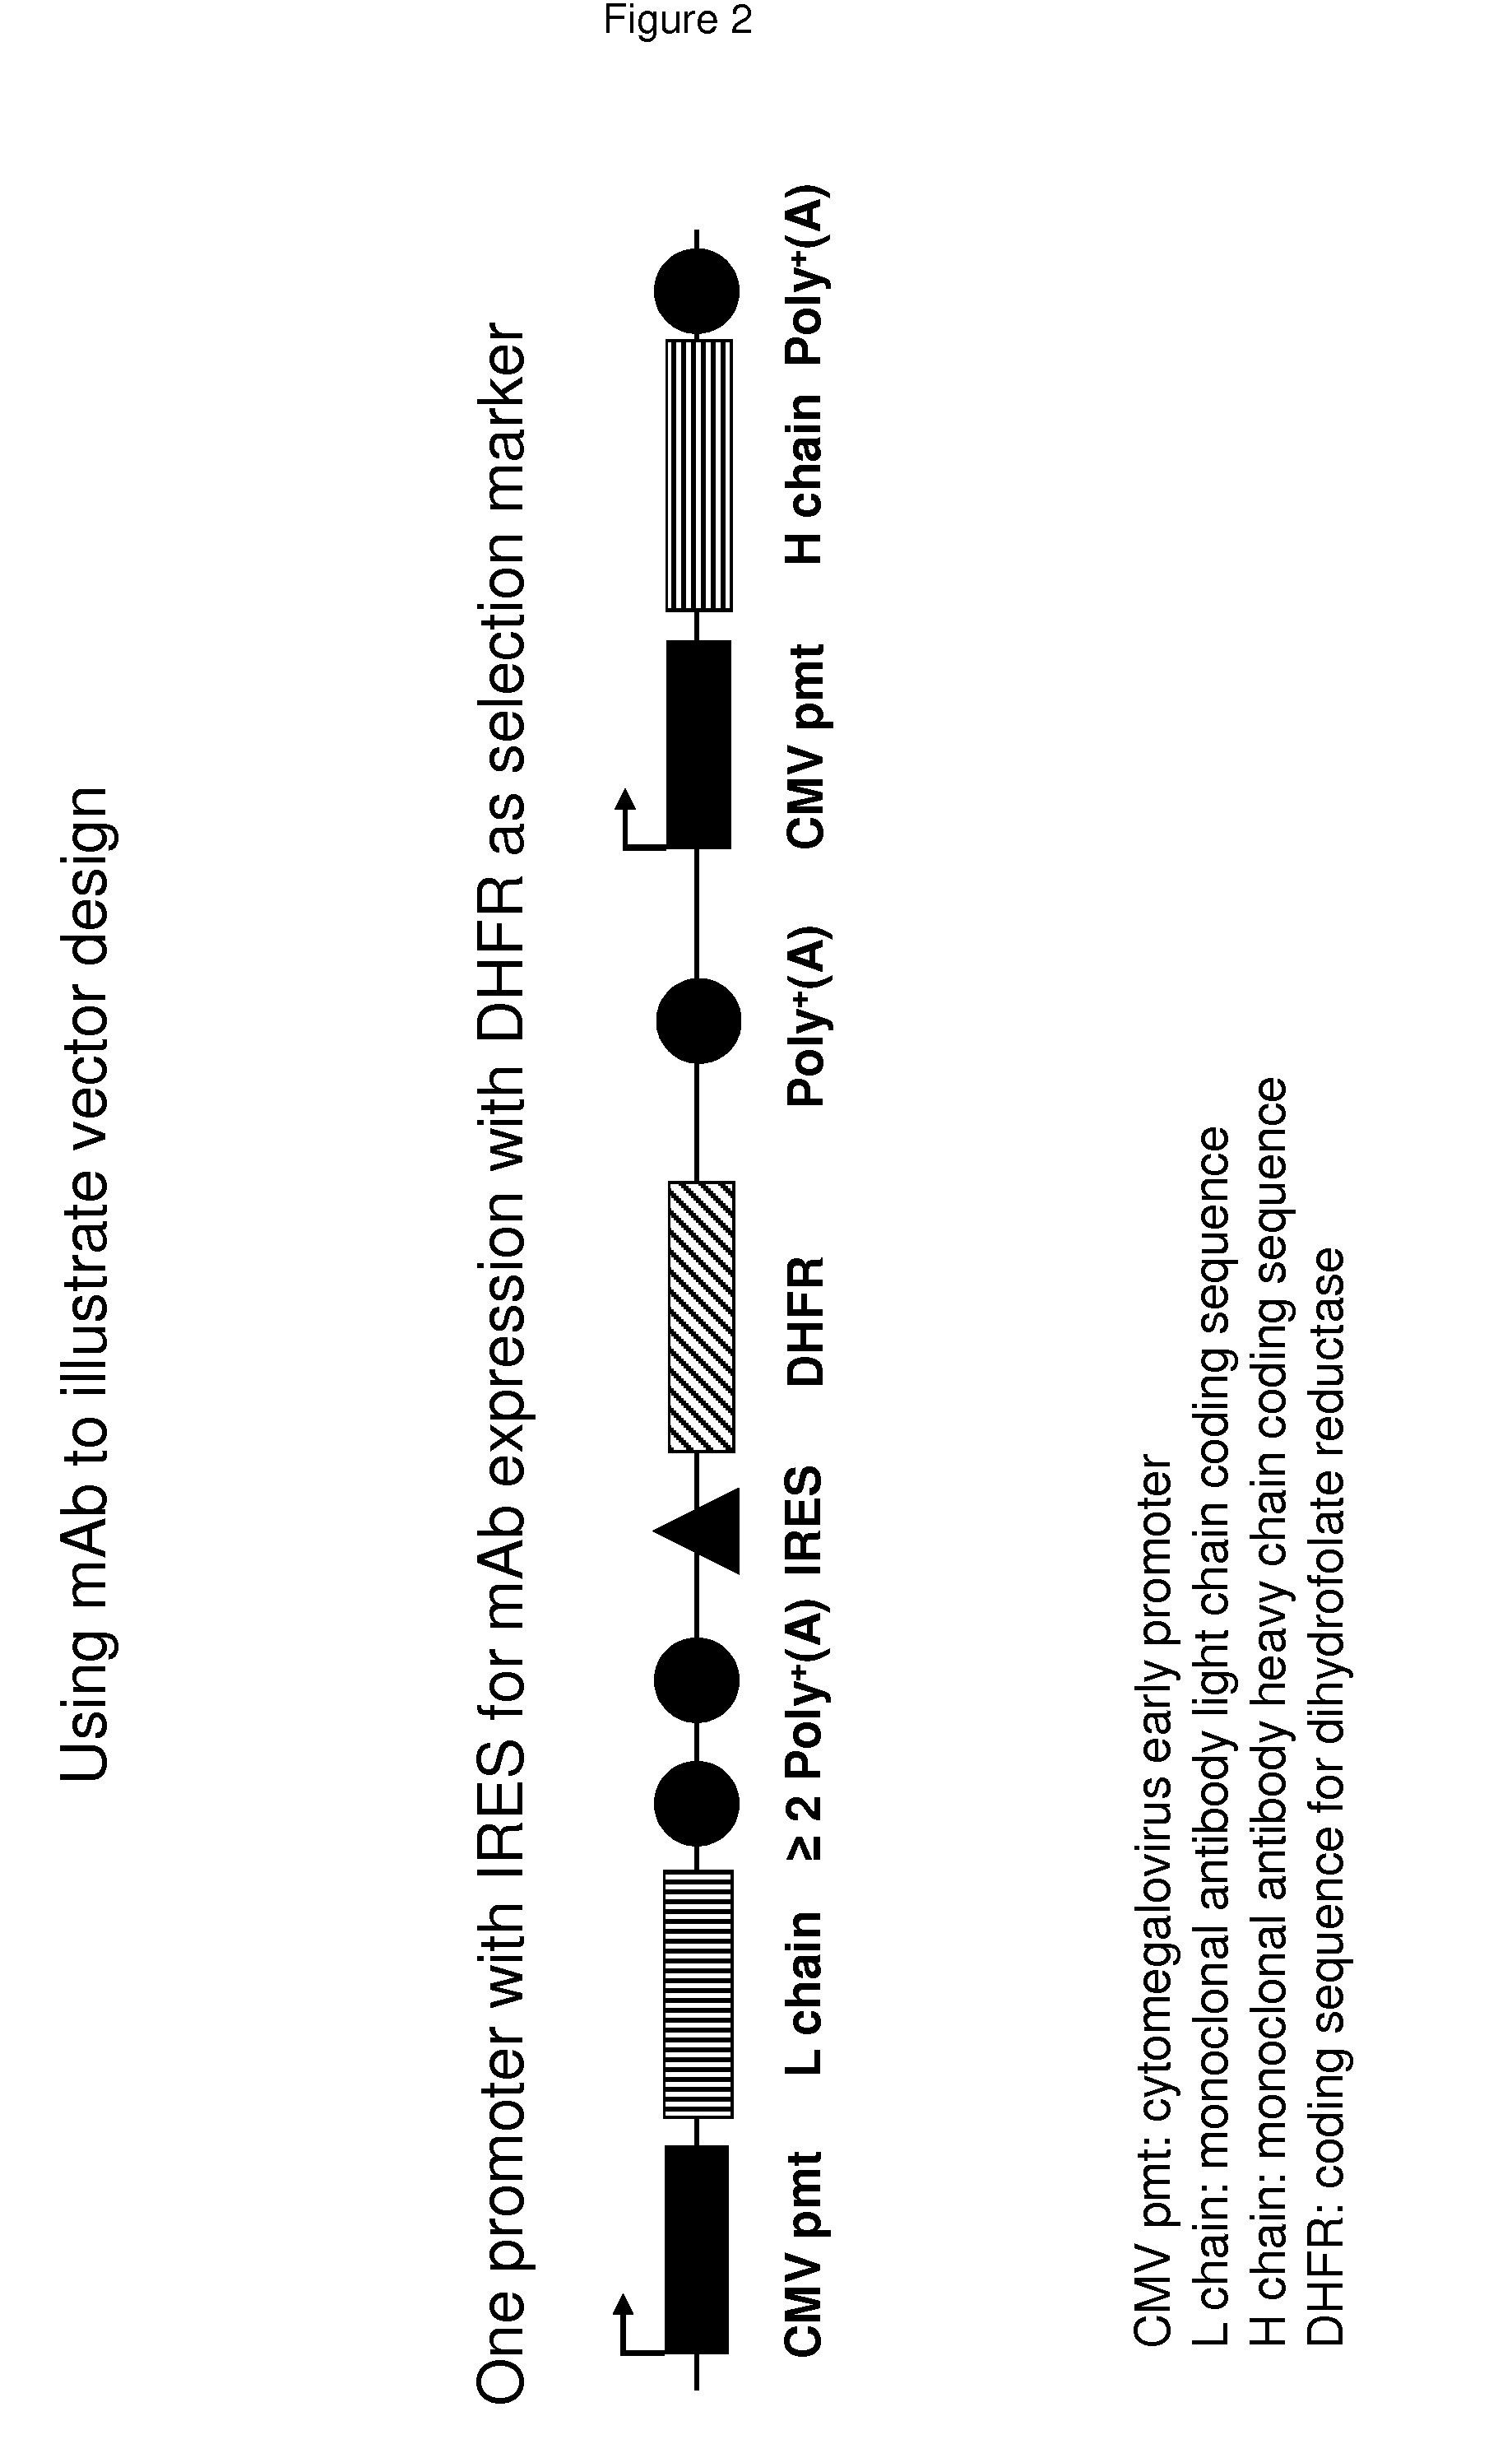 Vectors and methods for recombinant protein expression